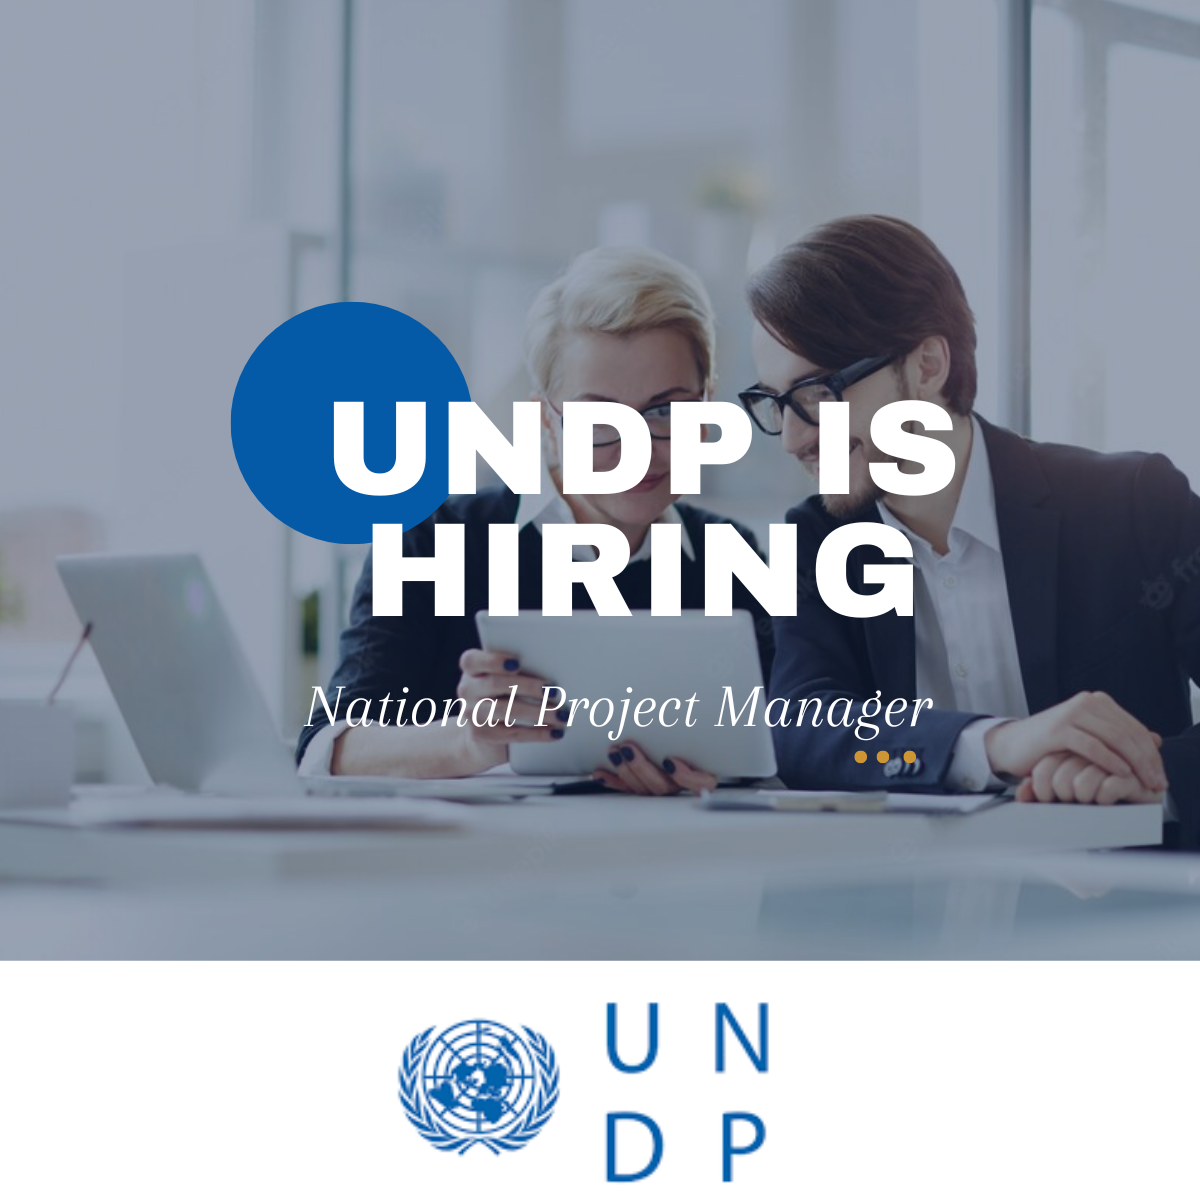 Join the United Nations Development Programme (UNDP) as a National Project Manager. Apply today and contribute to global development!